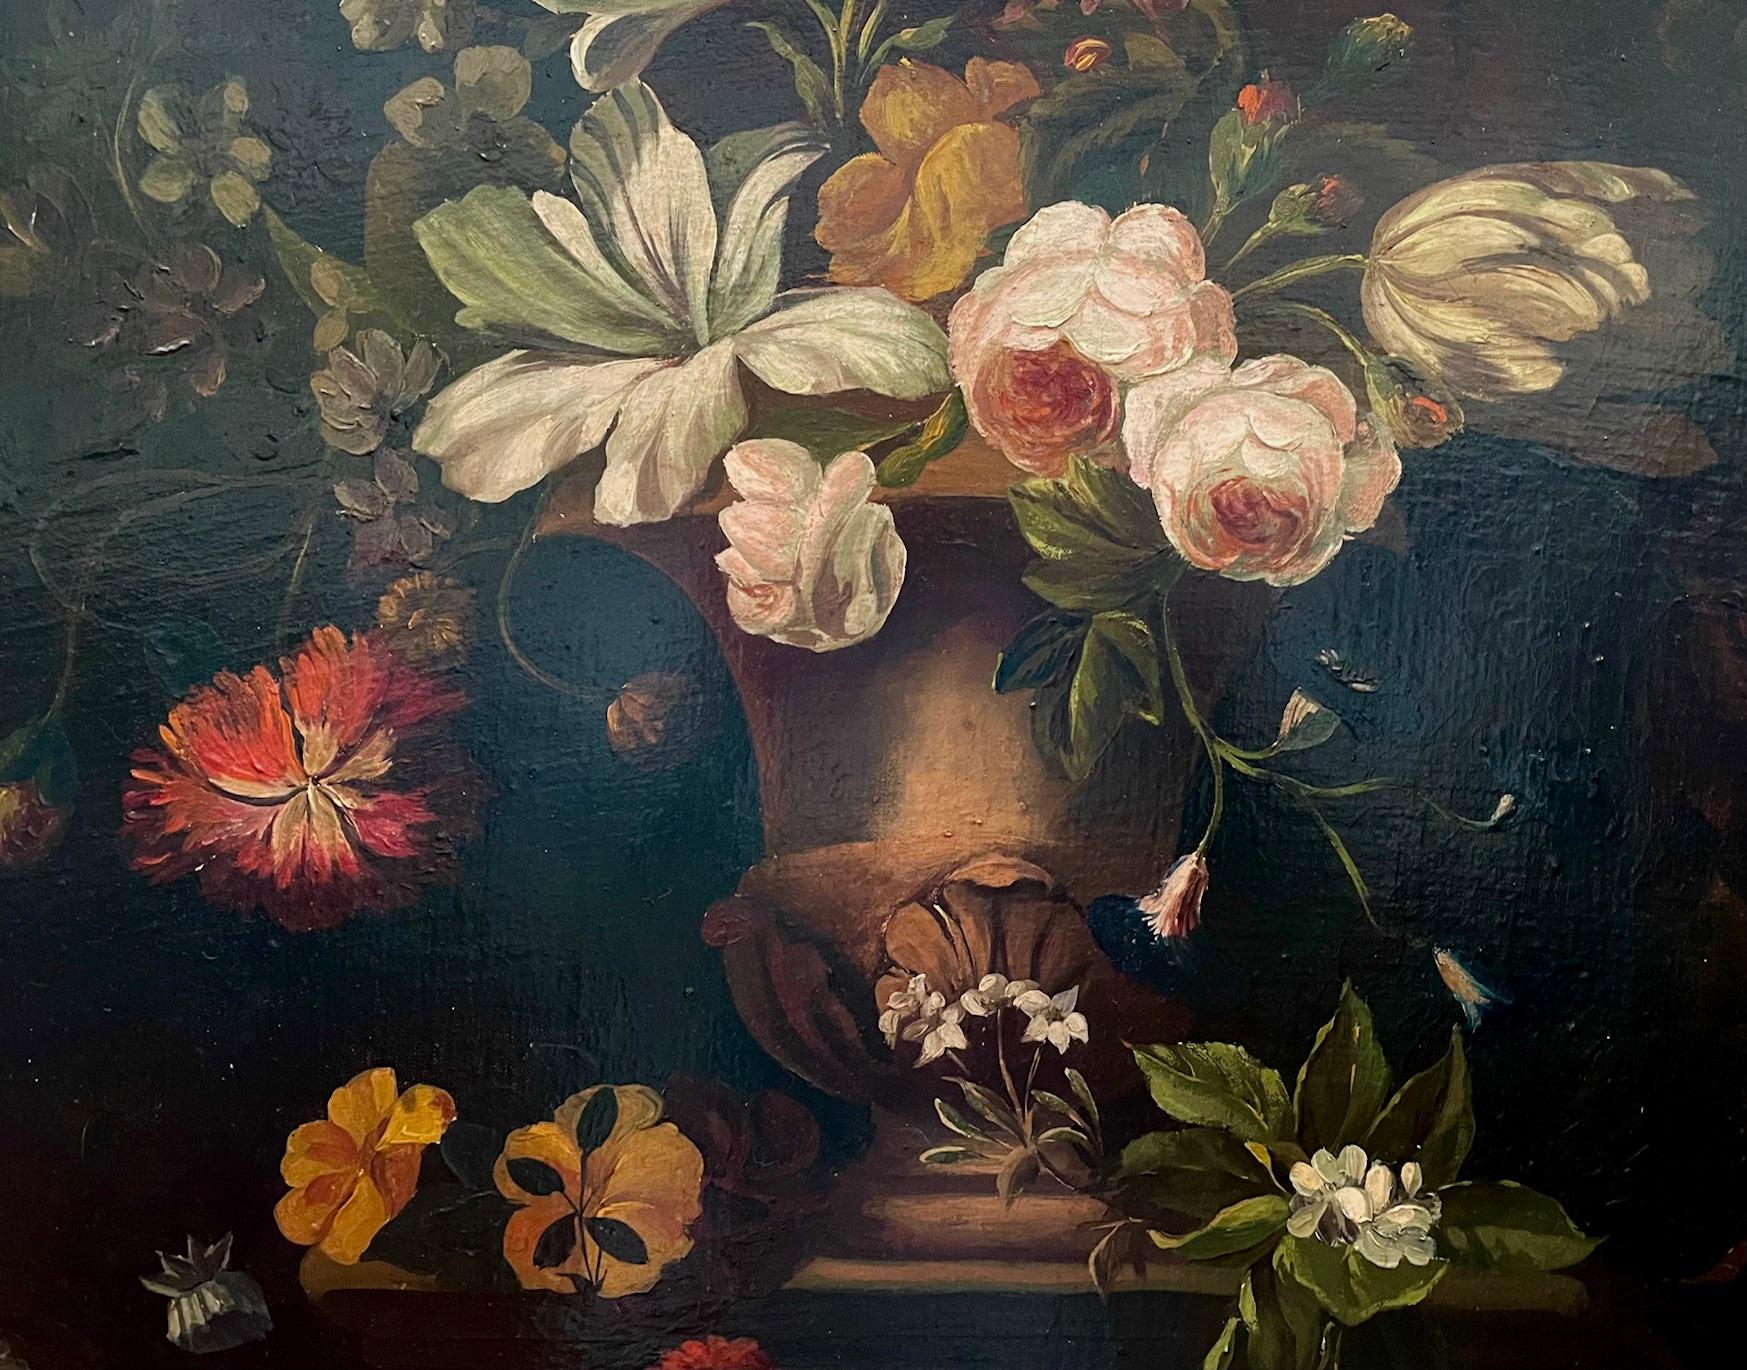 Florals in classic urn Old Masters 17th century Dutch style - Black Still-Life Painting by Unknown